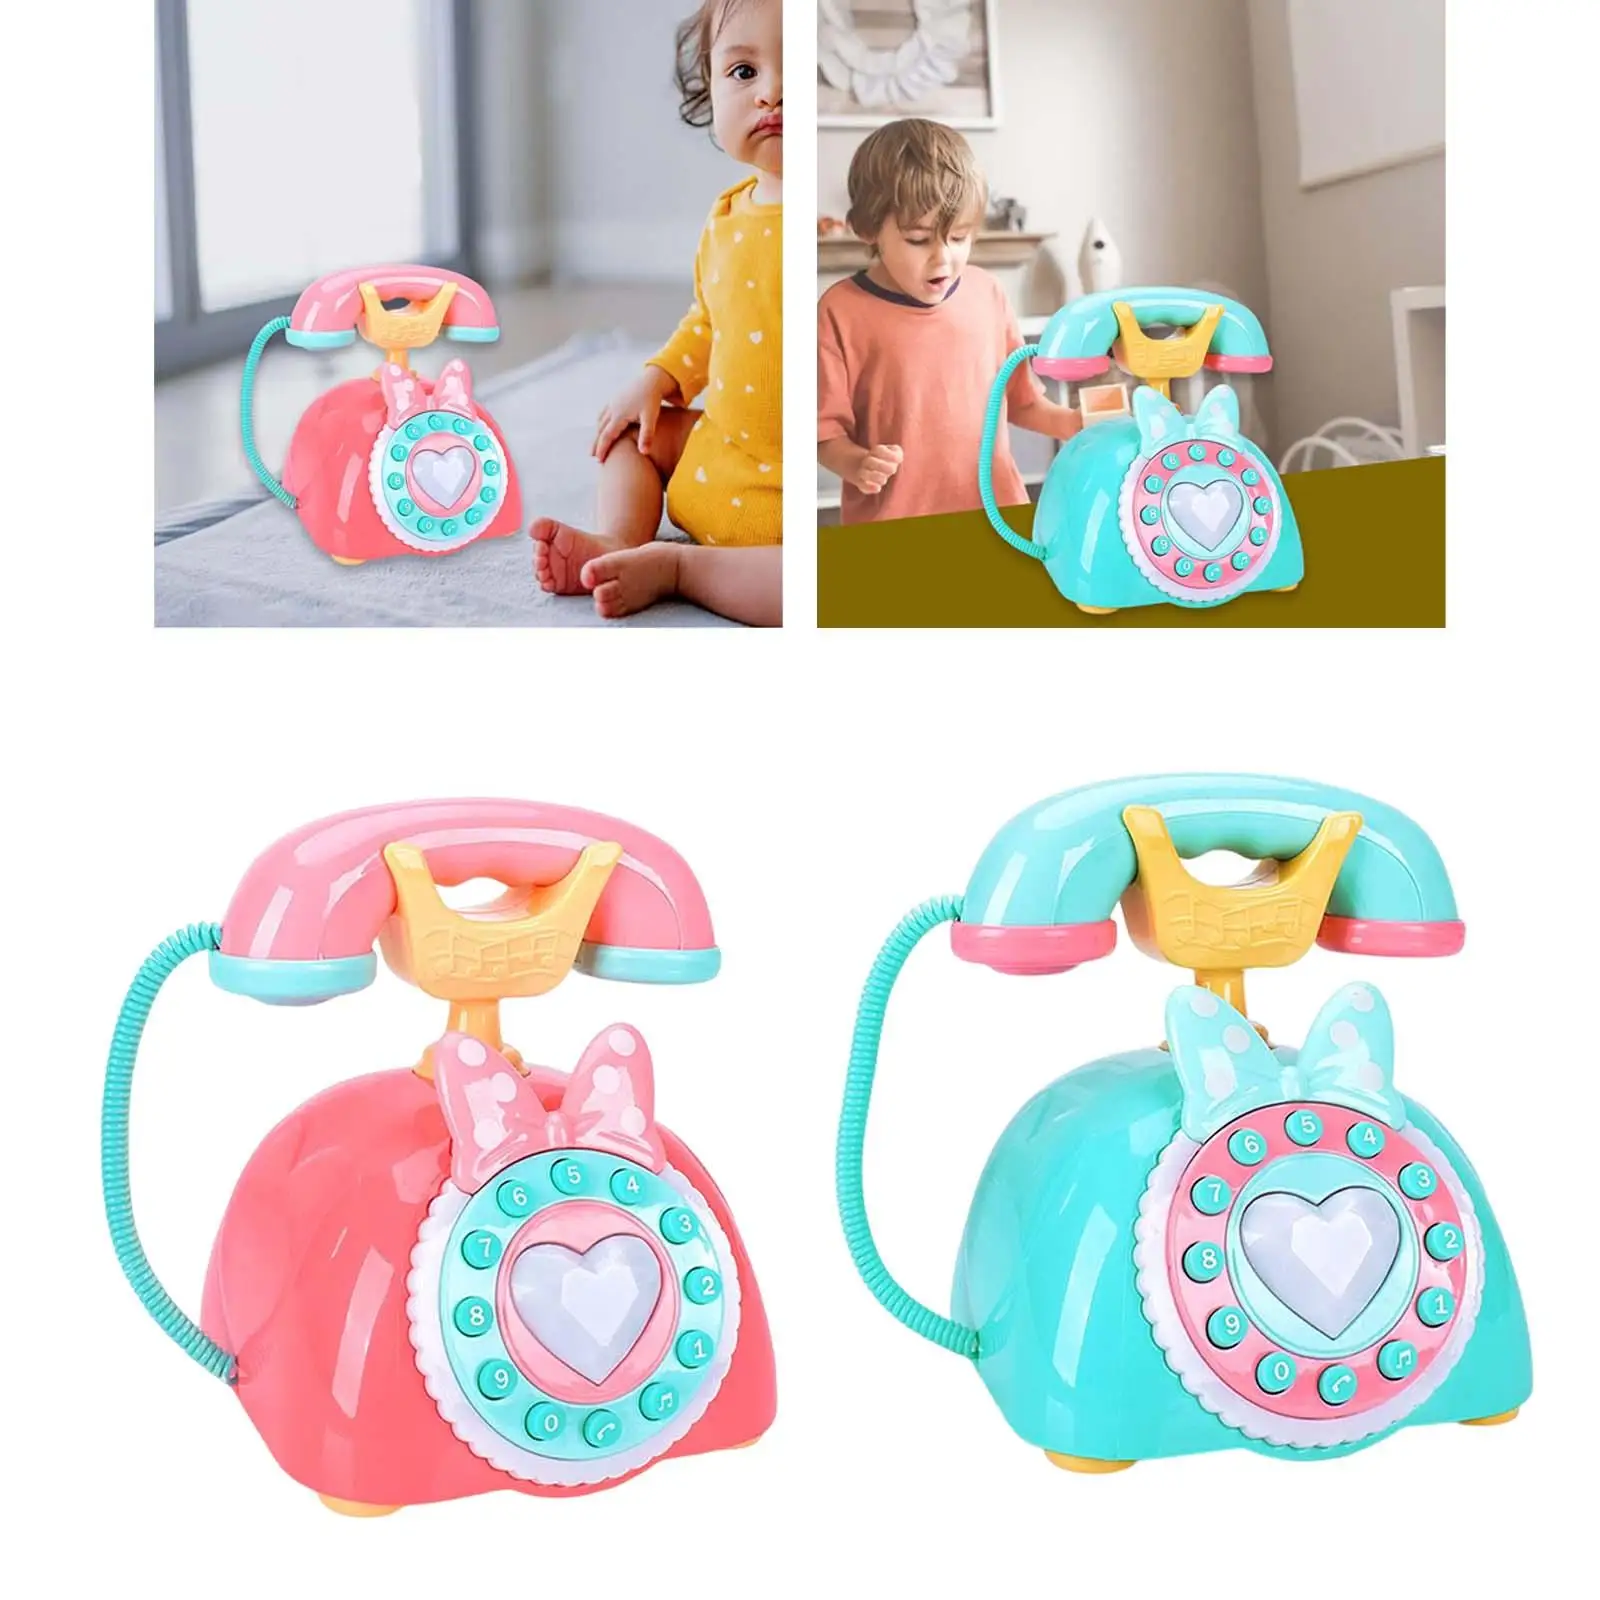 Telephone Toy  Early Education with  Enlightenment Leaning Machine Develop Development Baby Musical Toys for Toddlers